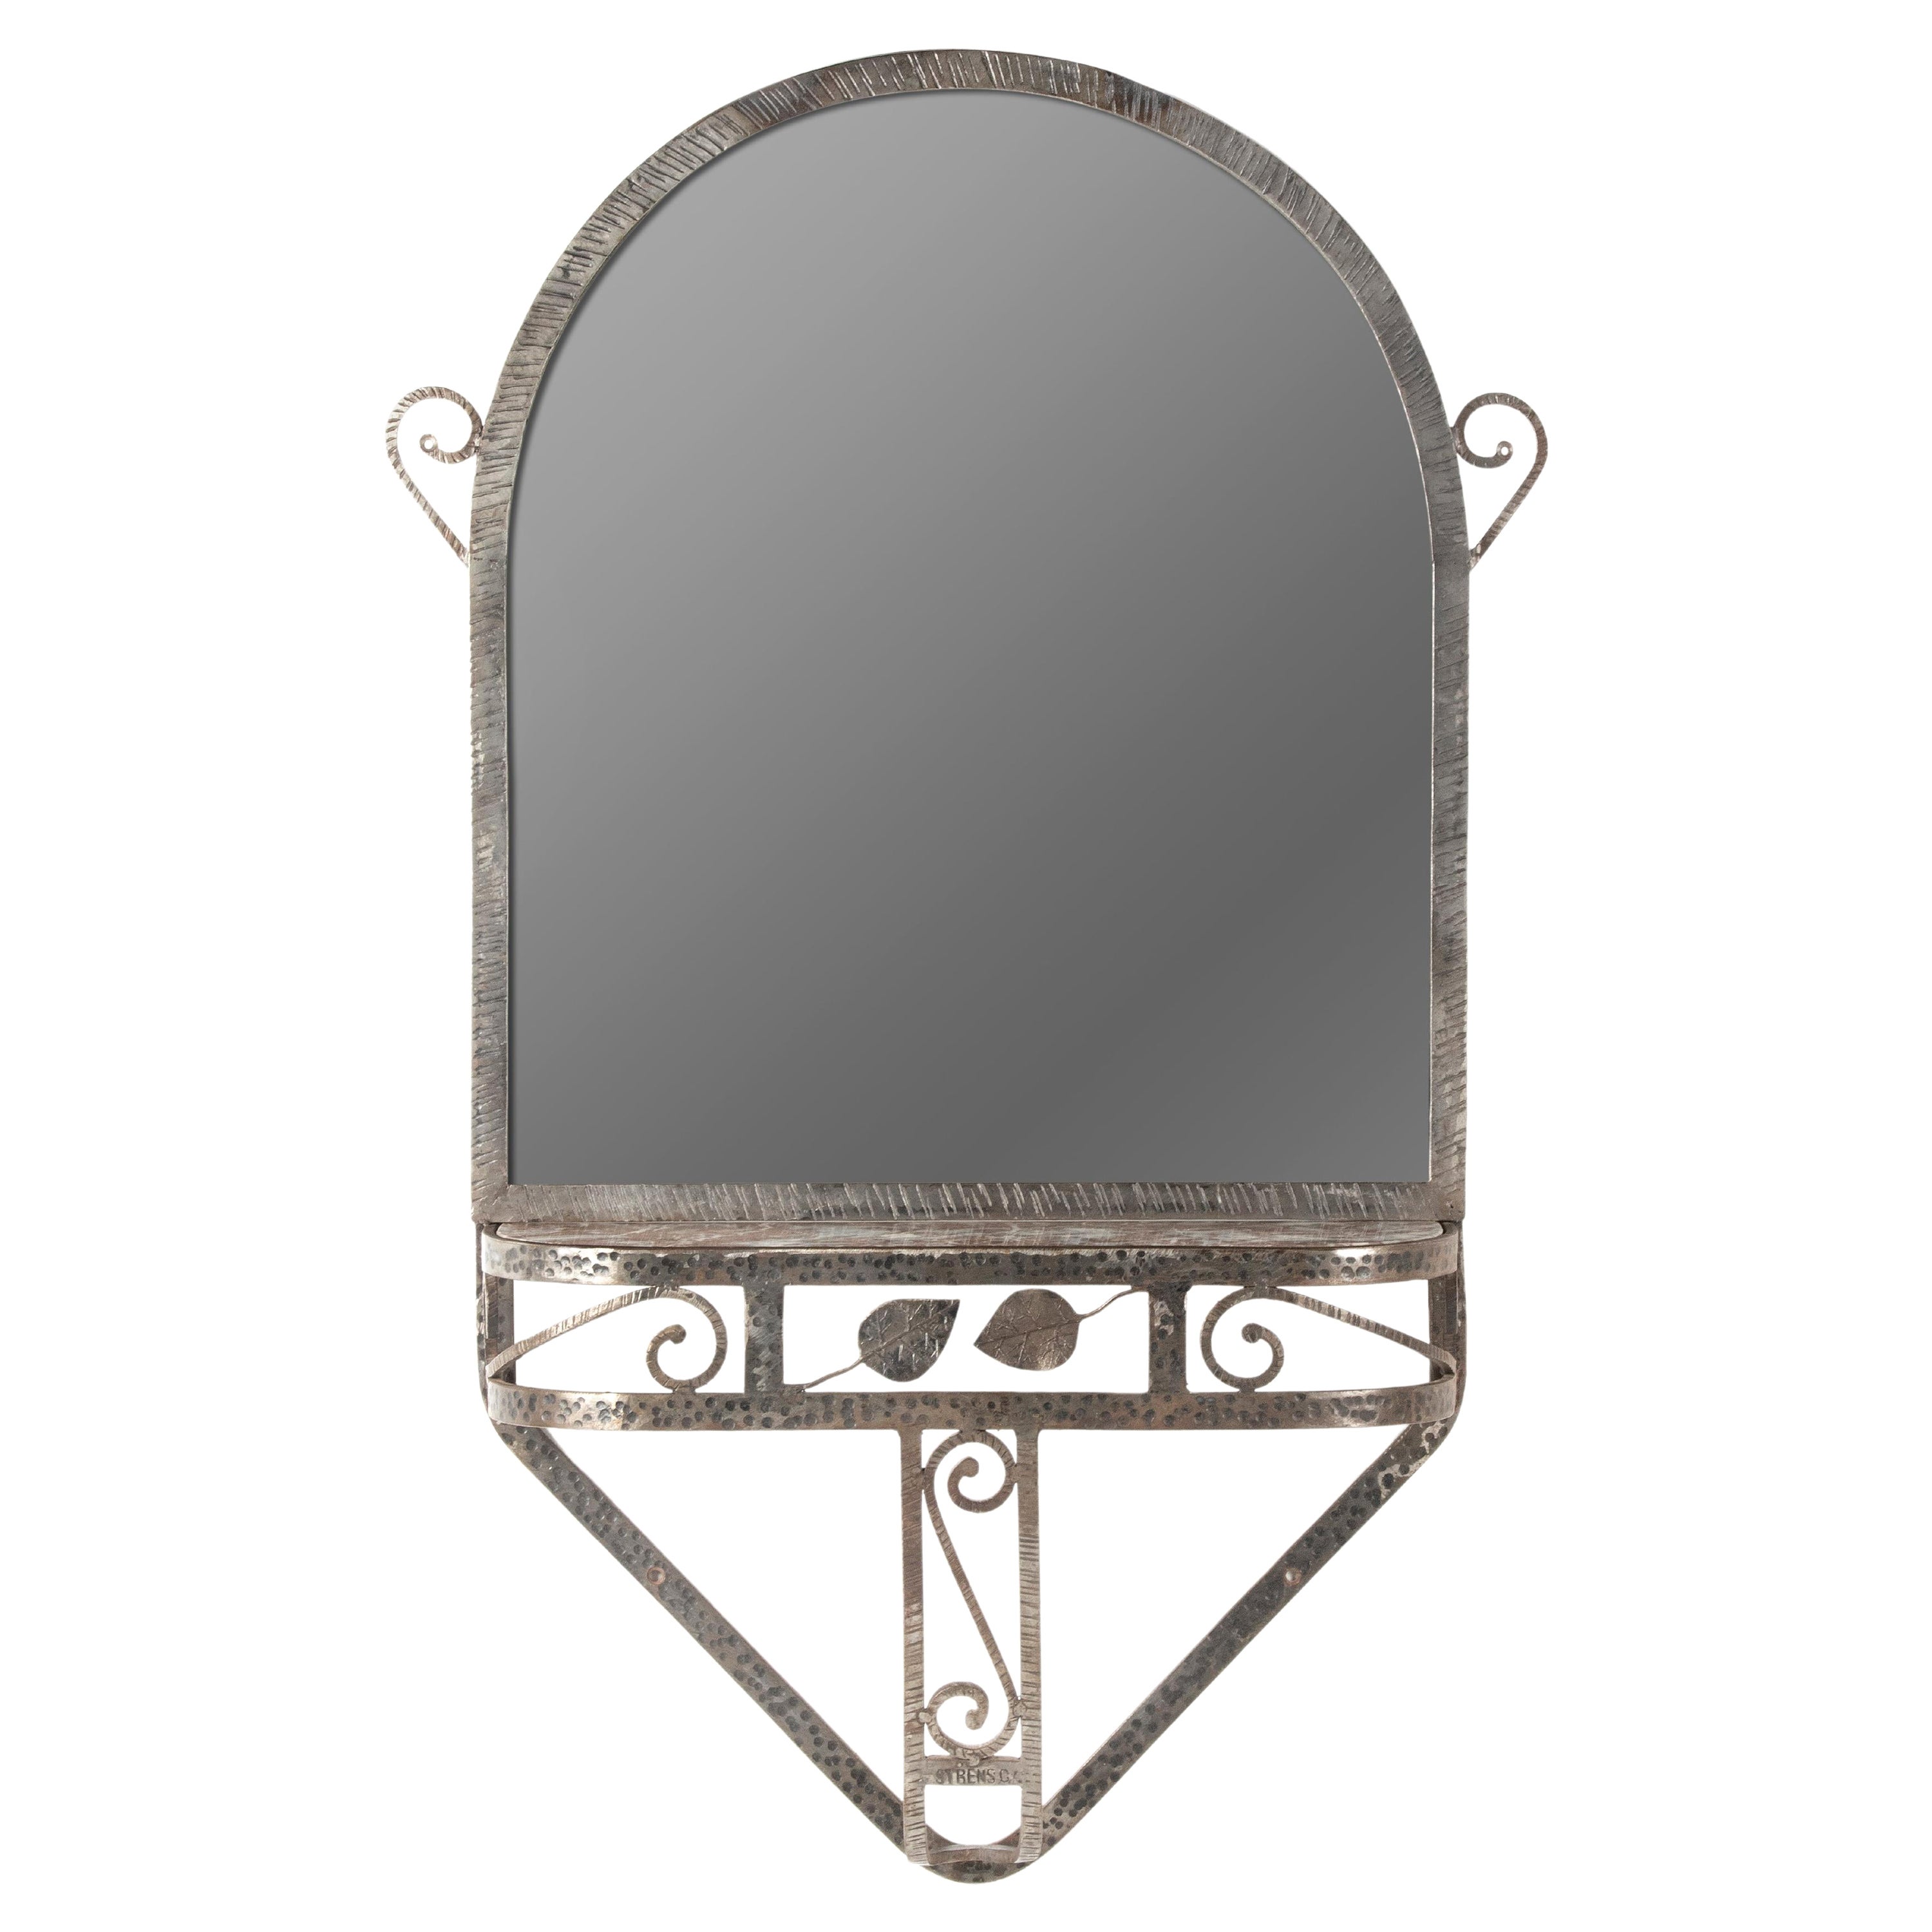 Art Deco Period Wrought Iron Wall Mirror with Marble Console, Strens For Sale